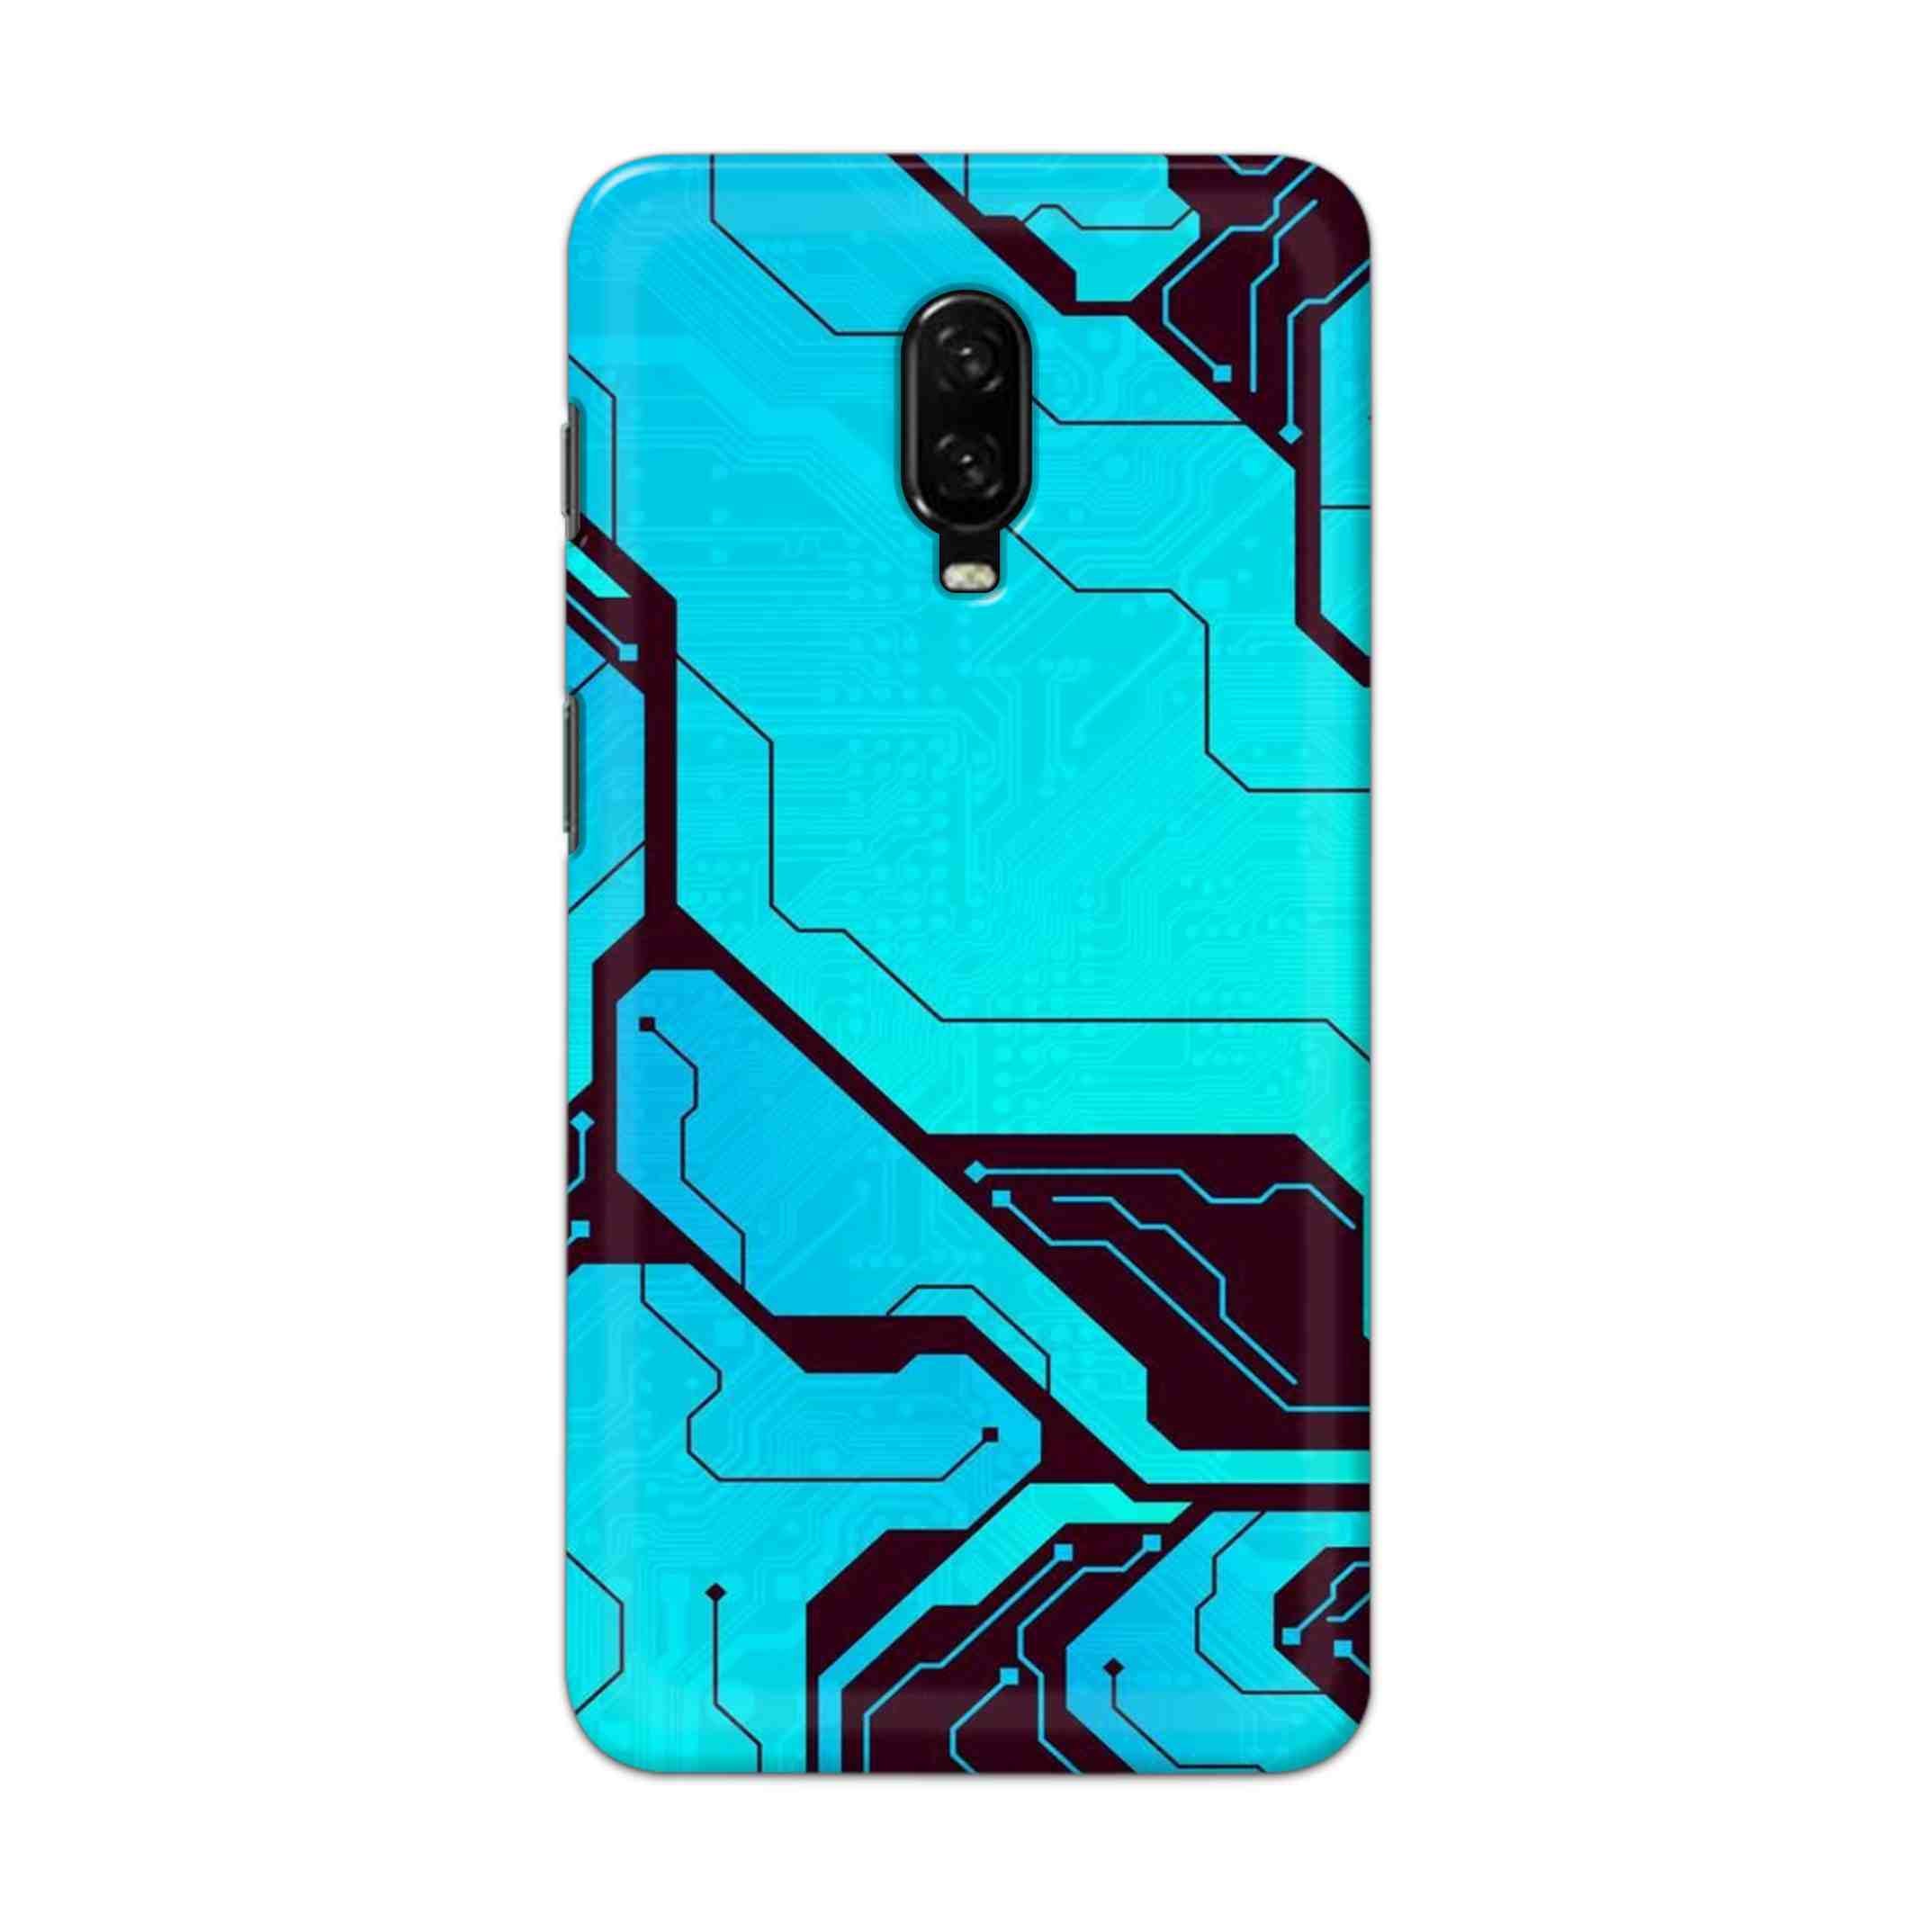 Buy Futuristic Line Hard Back Mobile Phone Case Cover For OnePlus 6T Online